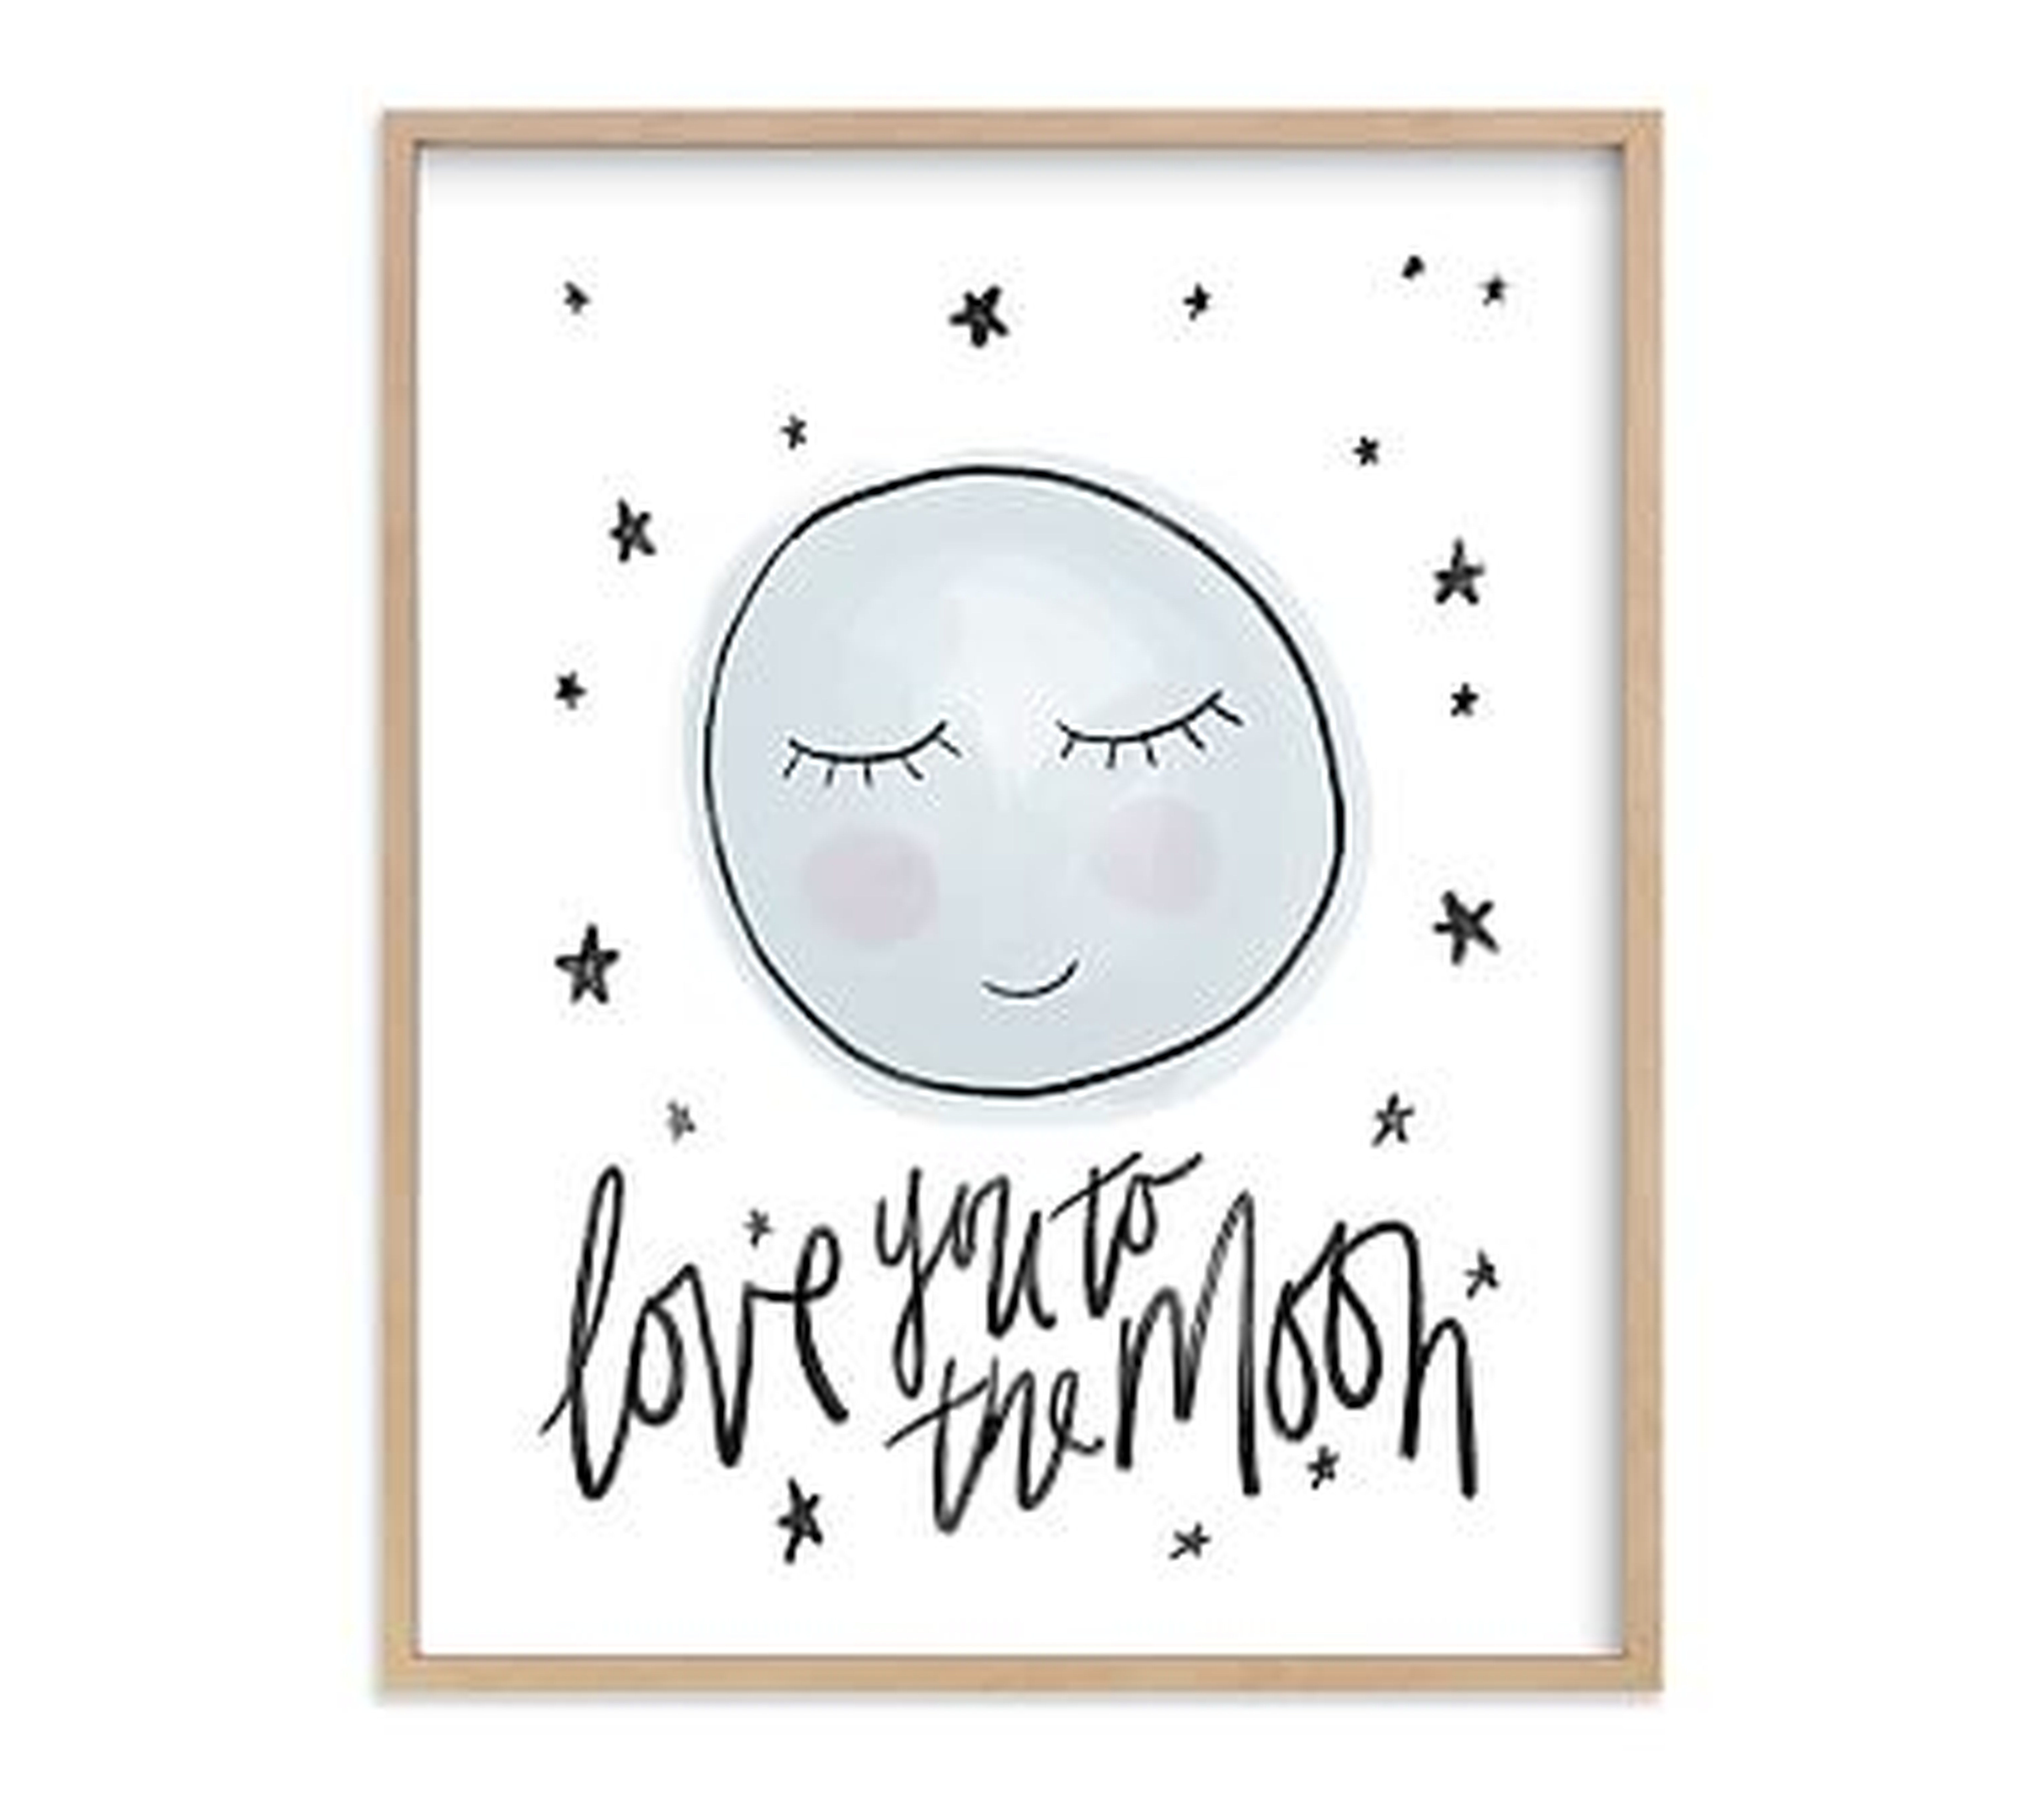 A Sweet Moon Wall Art by Minted(R), 16x20, Natural - Pottery Barn Kids